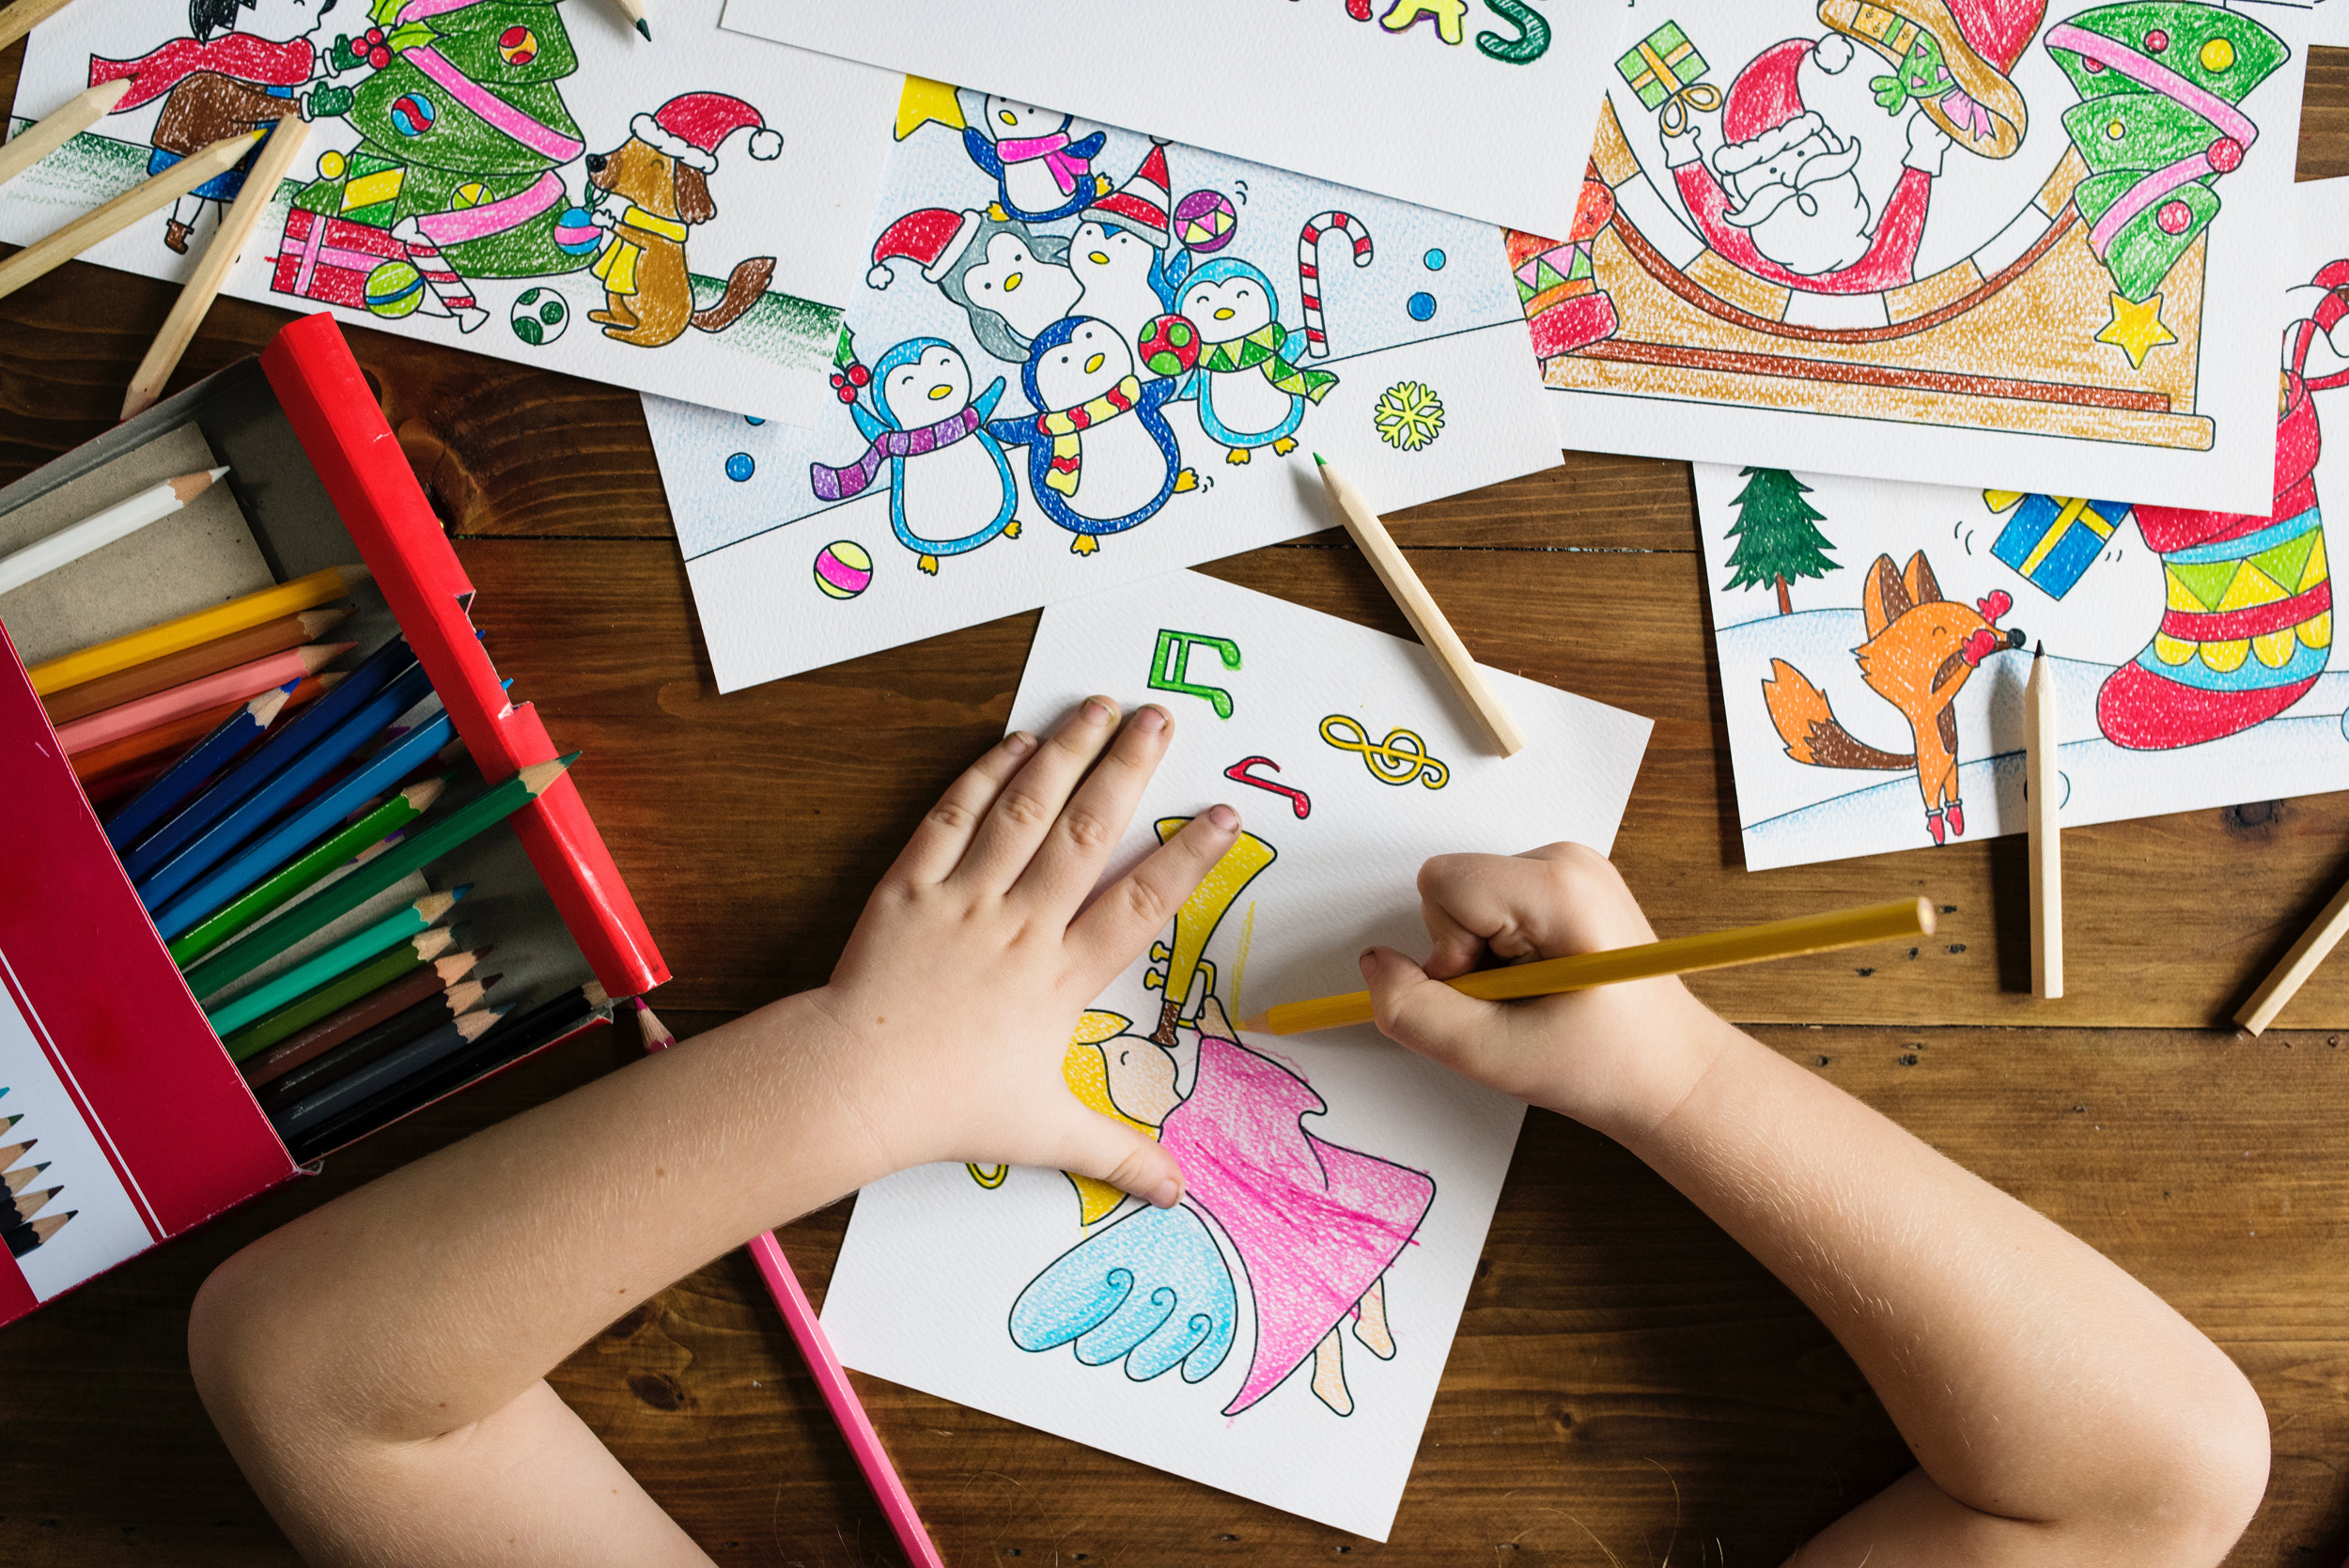 Child colouring in - Out of schools activities